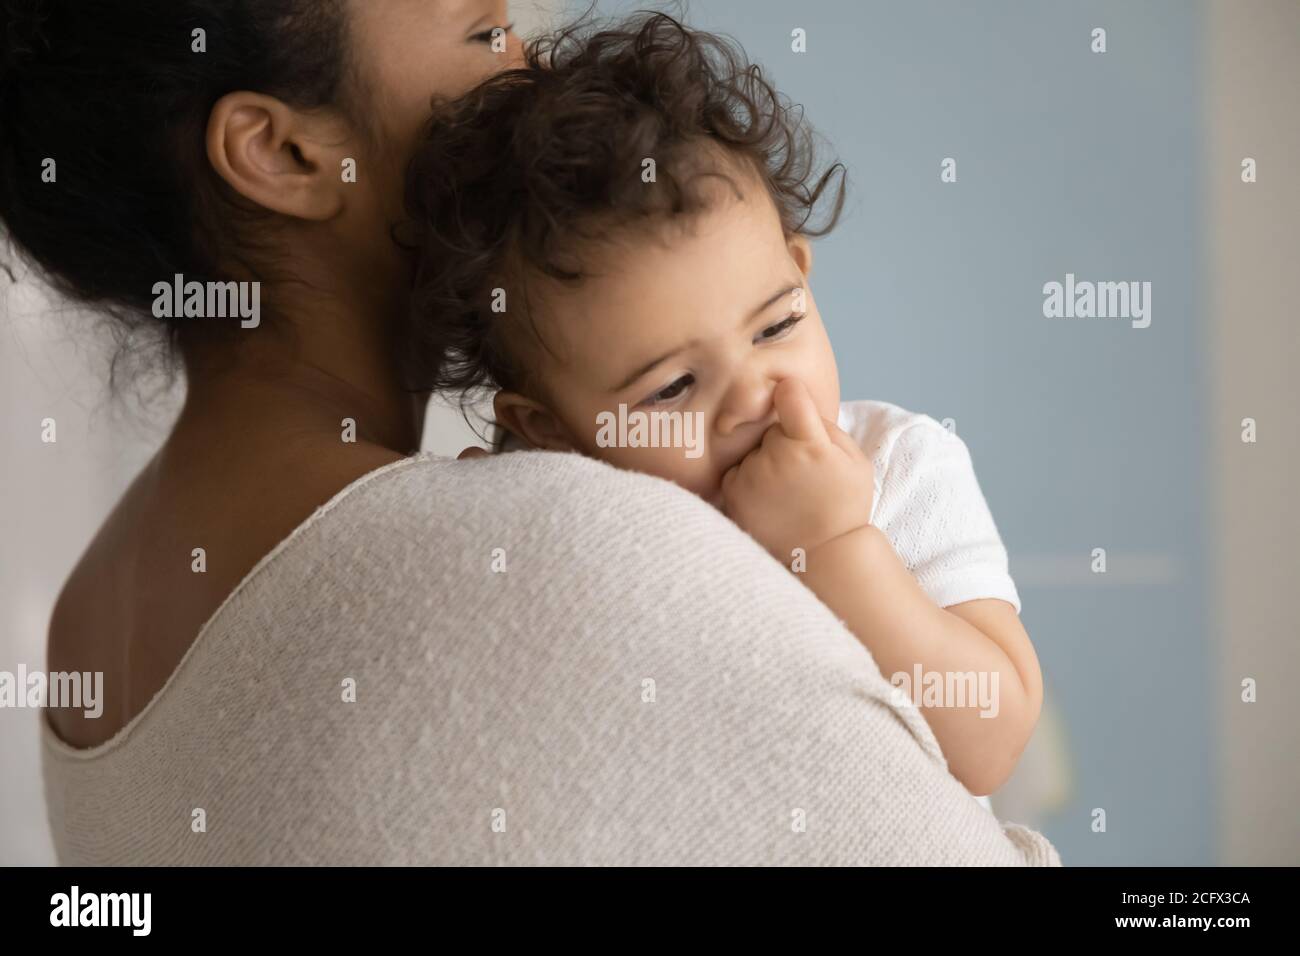 Affectionate caring young mixed race mommy holding sleeping kid. Stock Photo